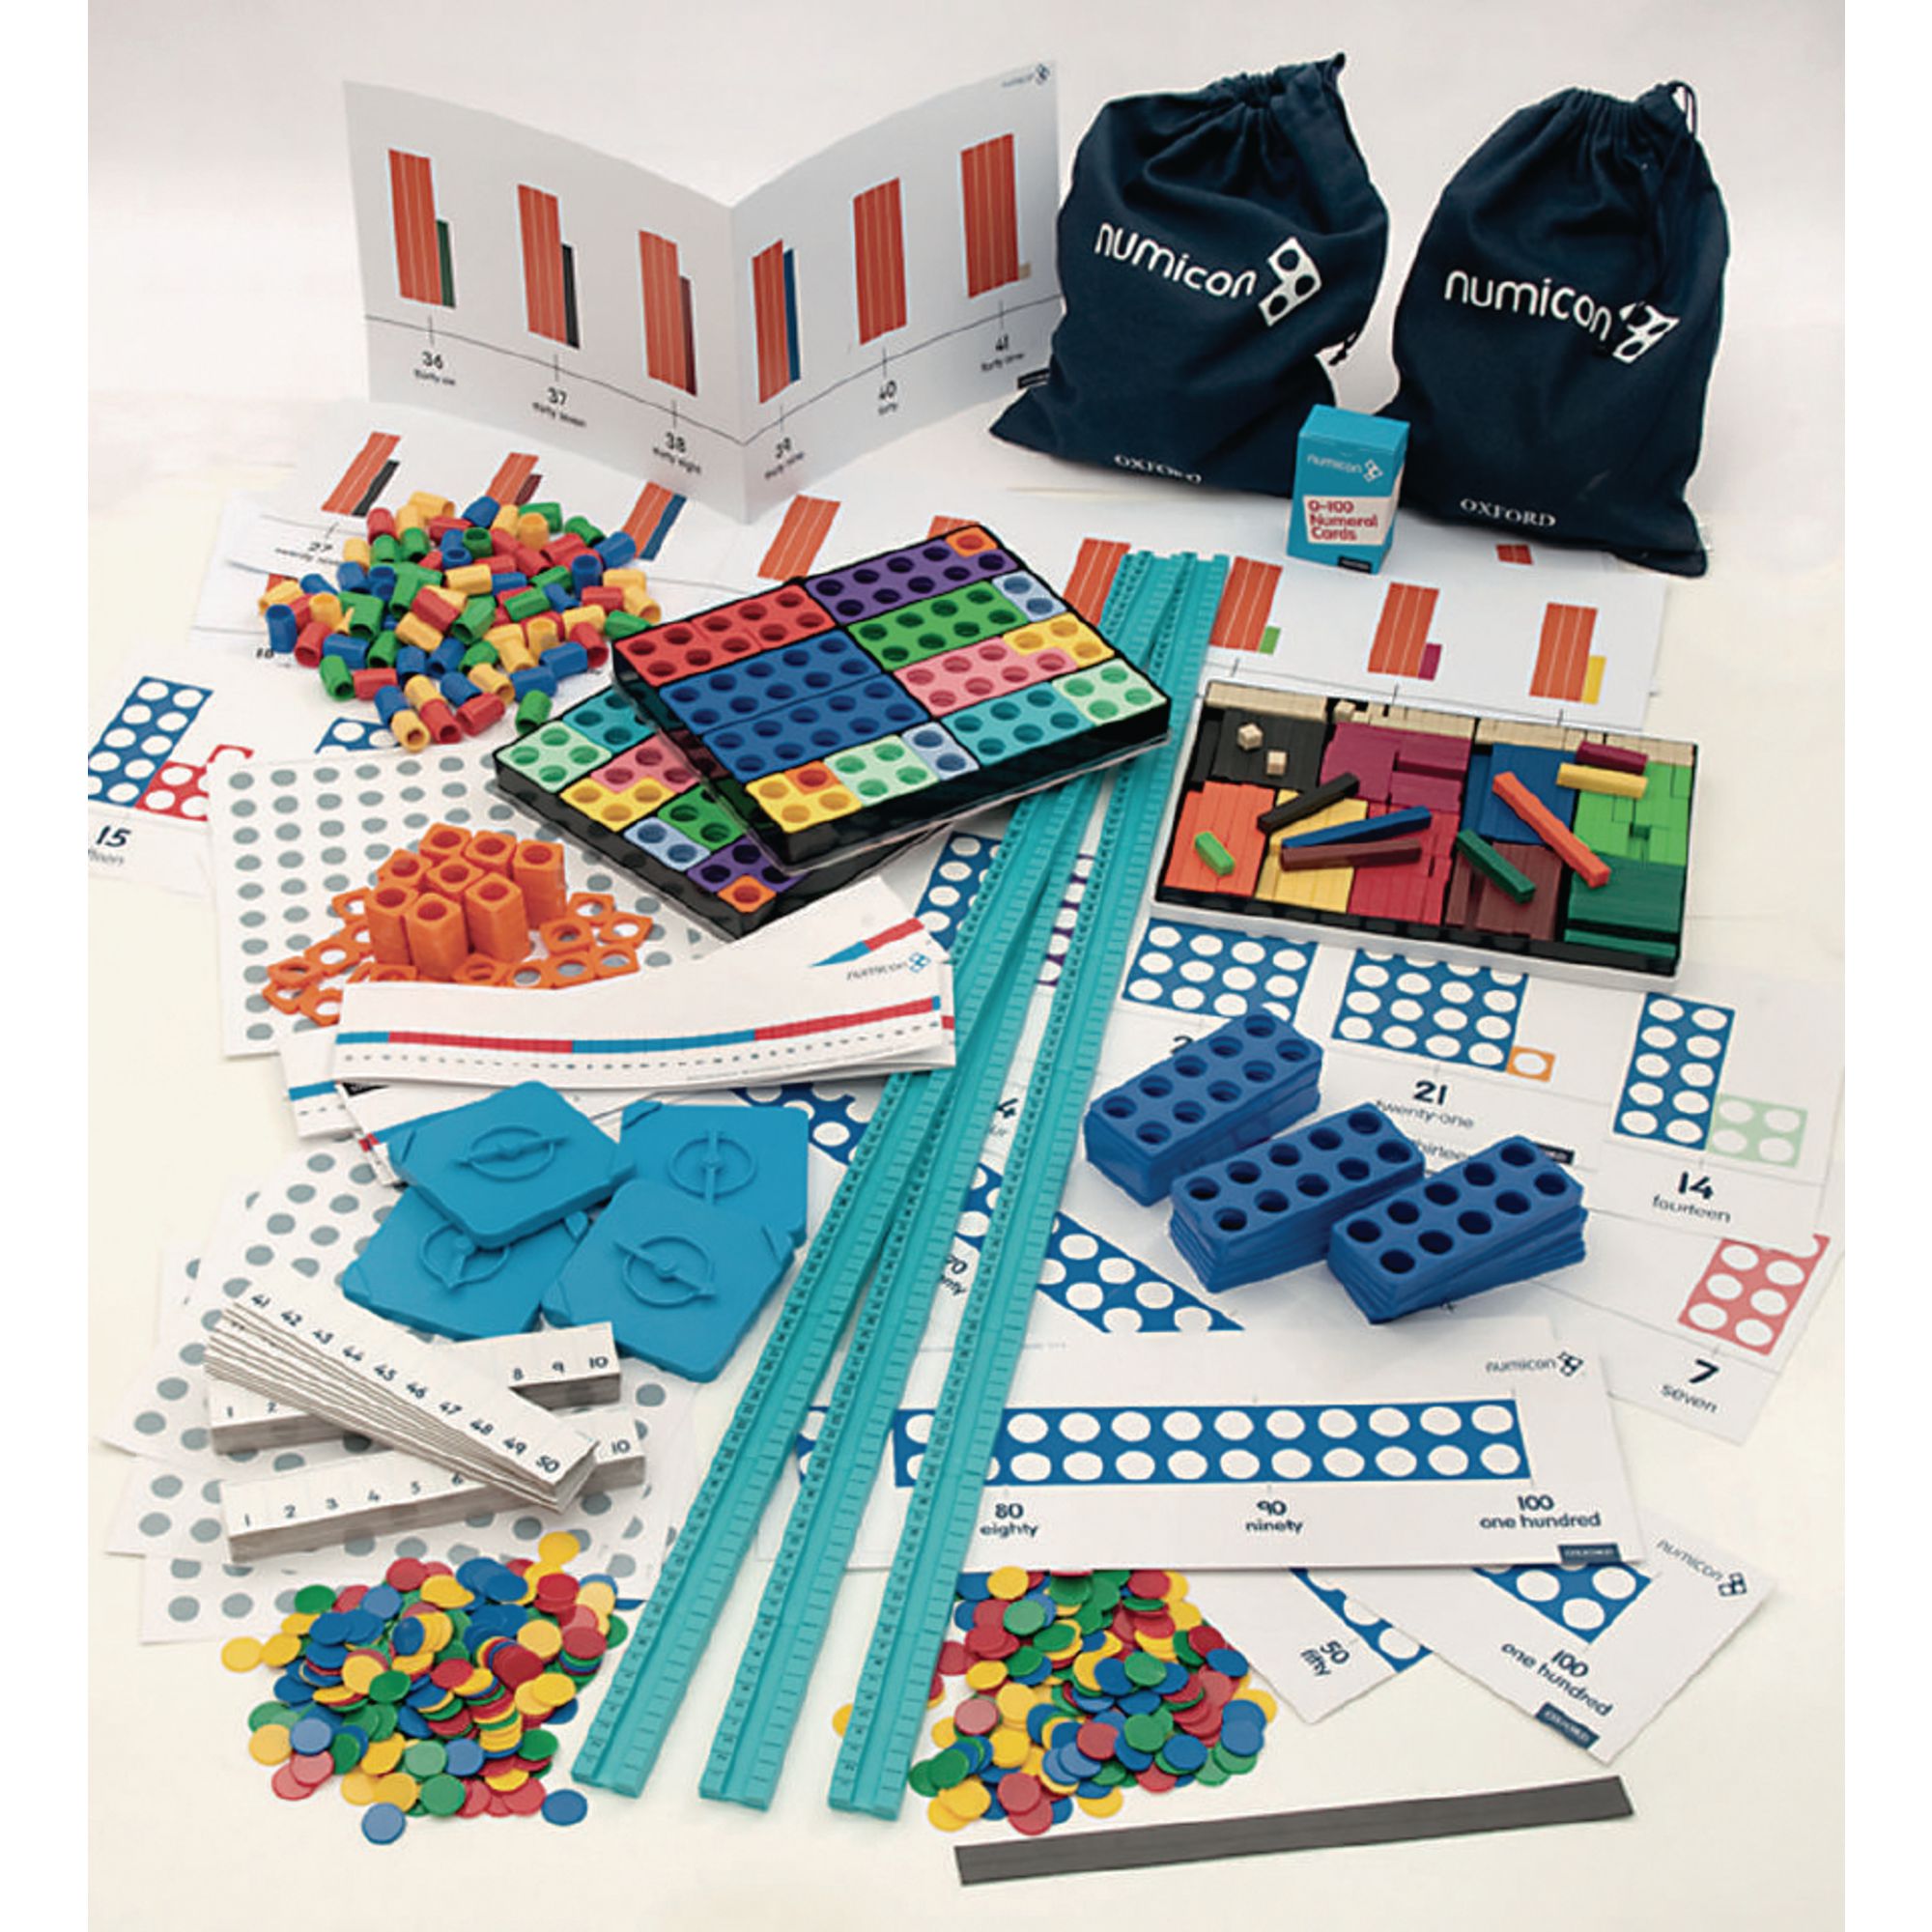 Numicon Year 3and4 Class Apparatus Pk B